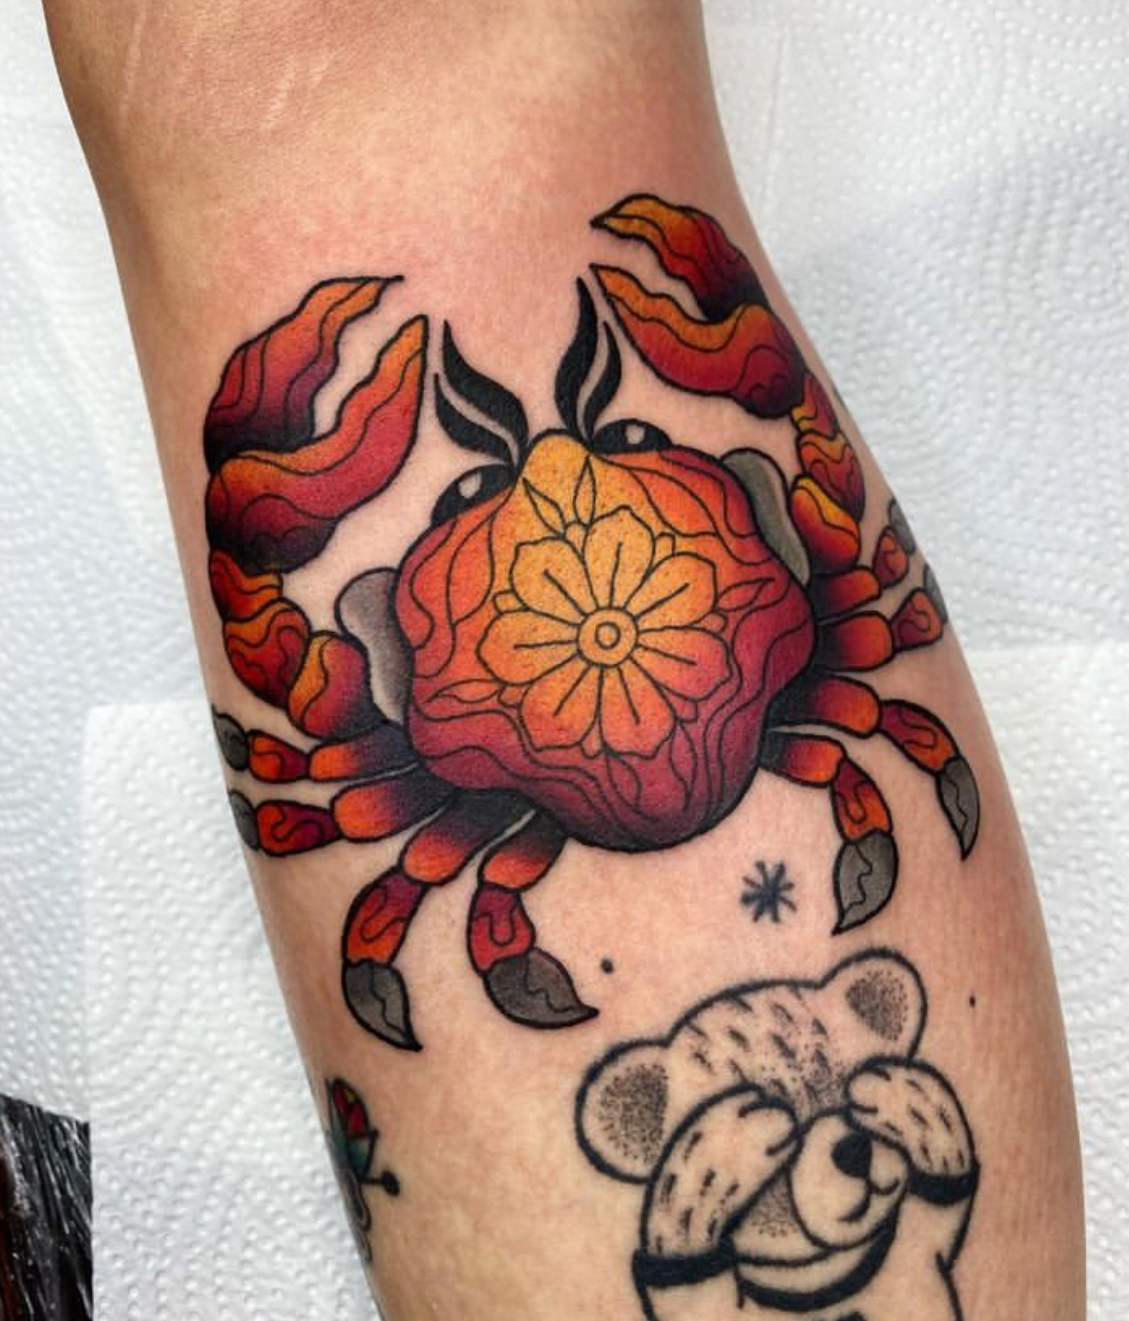 Confetti Cancer crab for wonderful and talented human Annie @starlilytattoo  You should get a tattoo from her if you want a large boost o... | Instagram